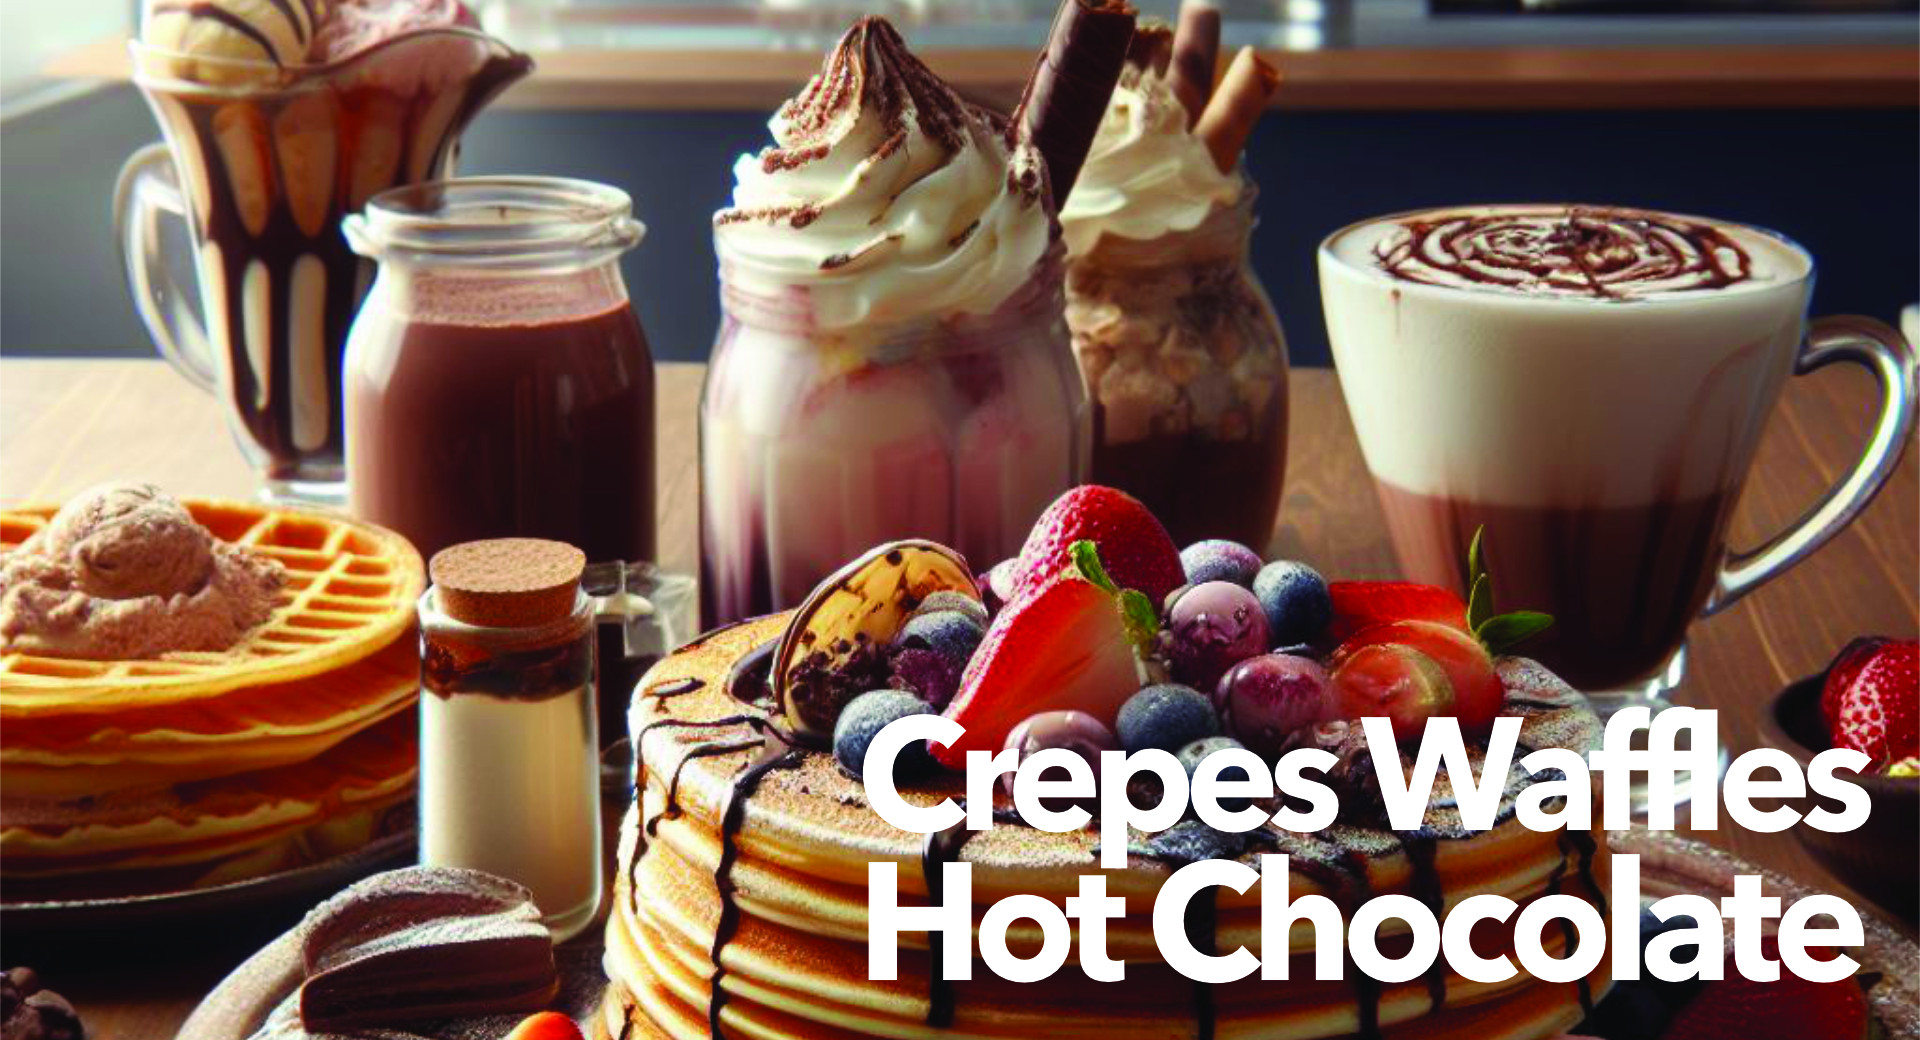 CREPES WAFFLES AND HOT CHOCOLATE A WINTER SPECIAL FOR YOUR GELATO PARLOR